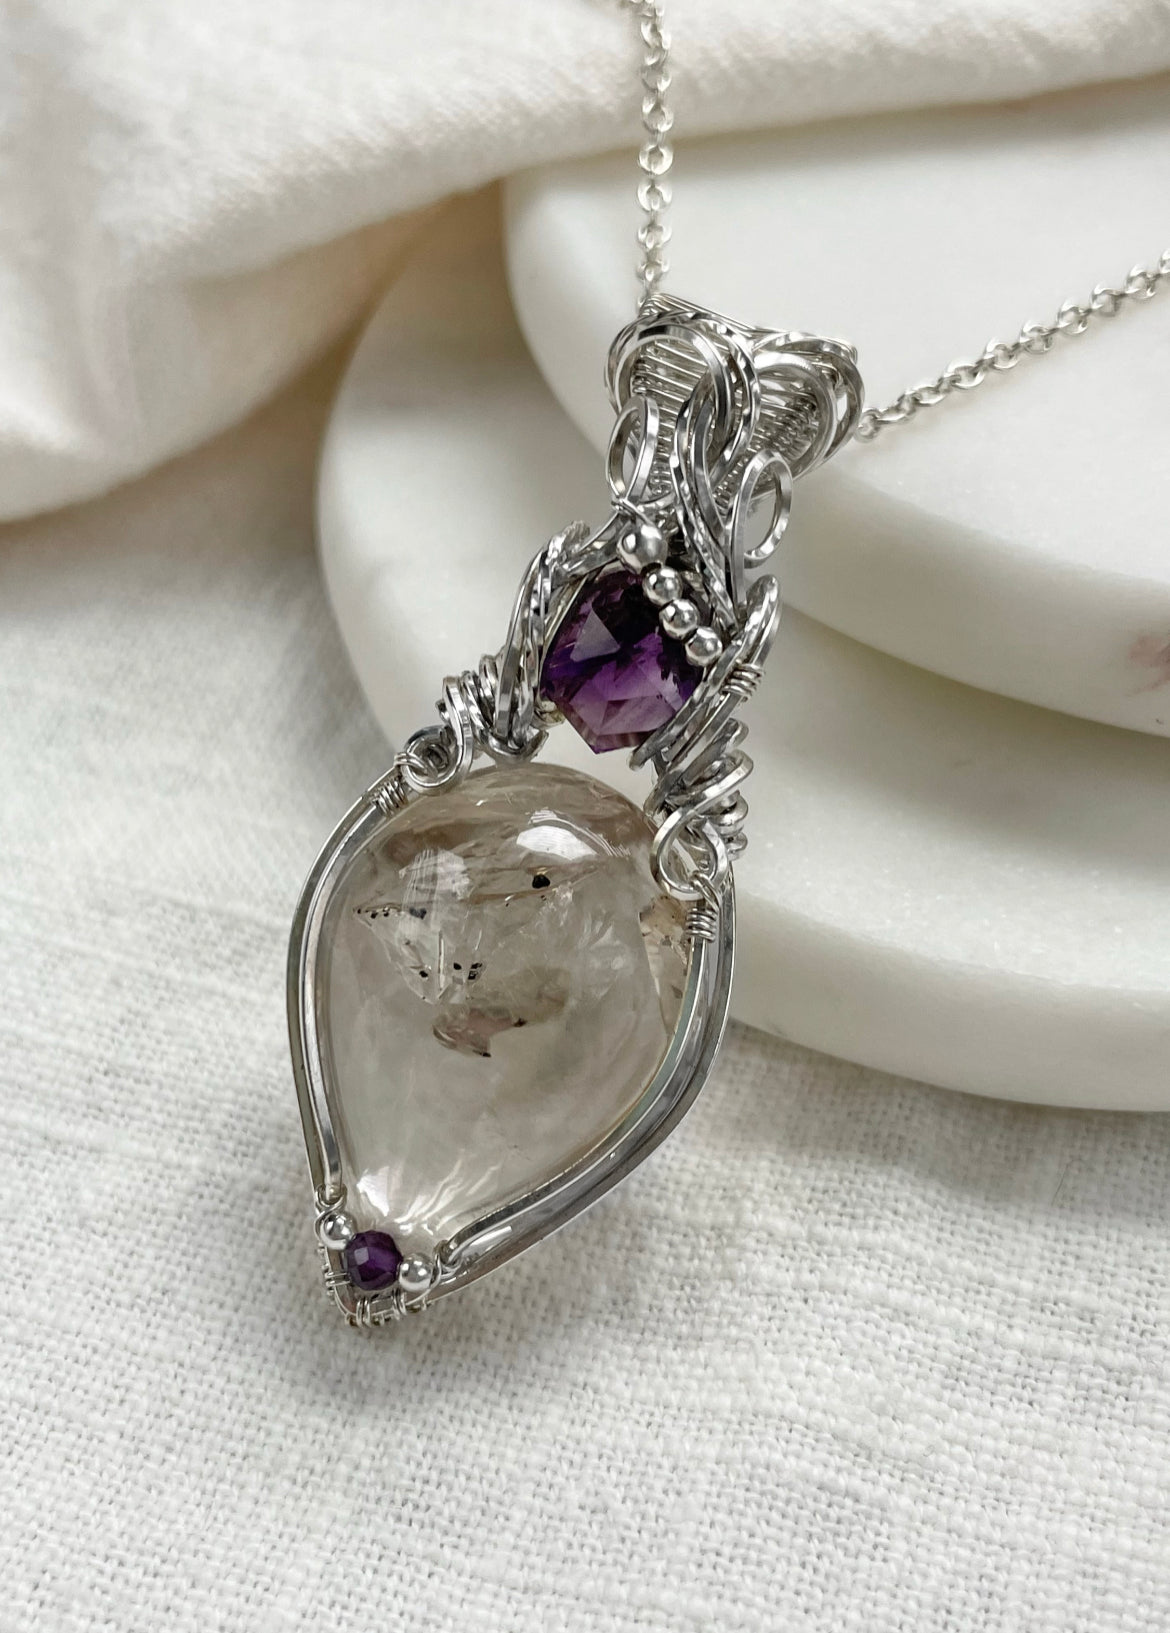 Rare Enhydro Quartz, Amethyst Necklace in 0.925 Sterling Silver